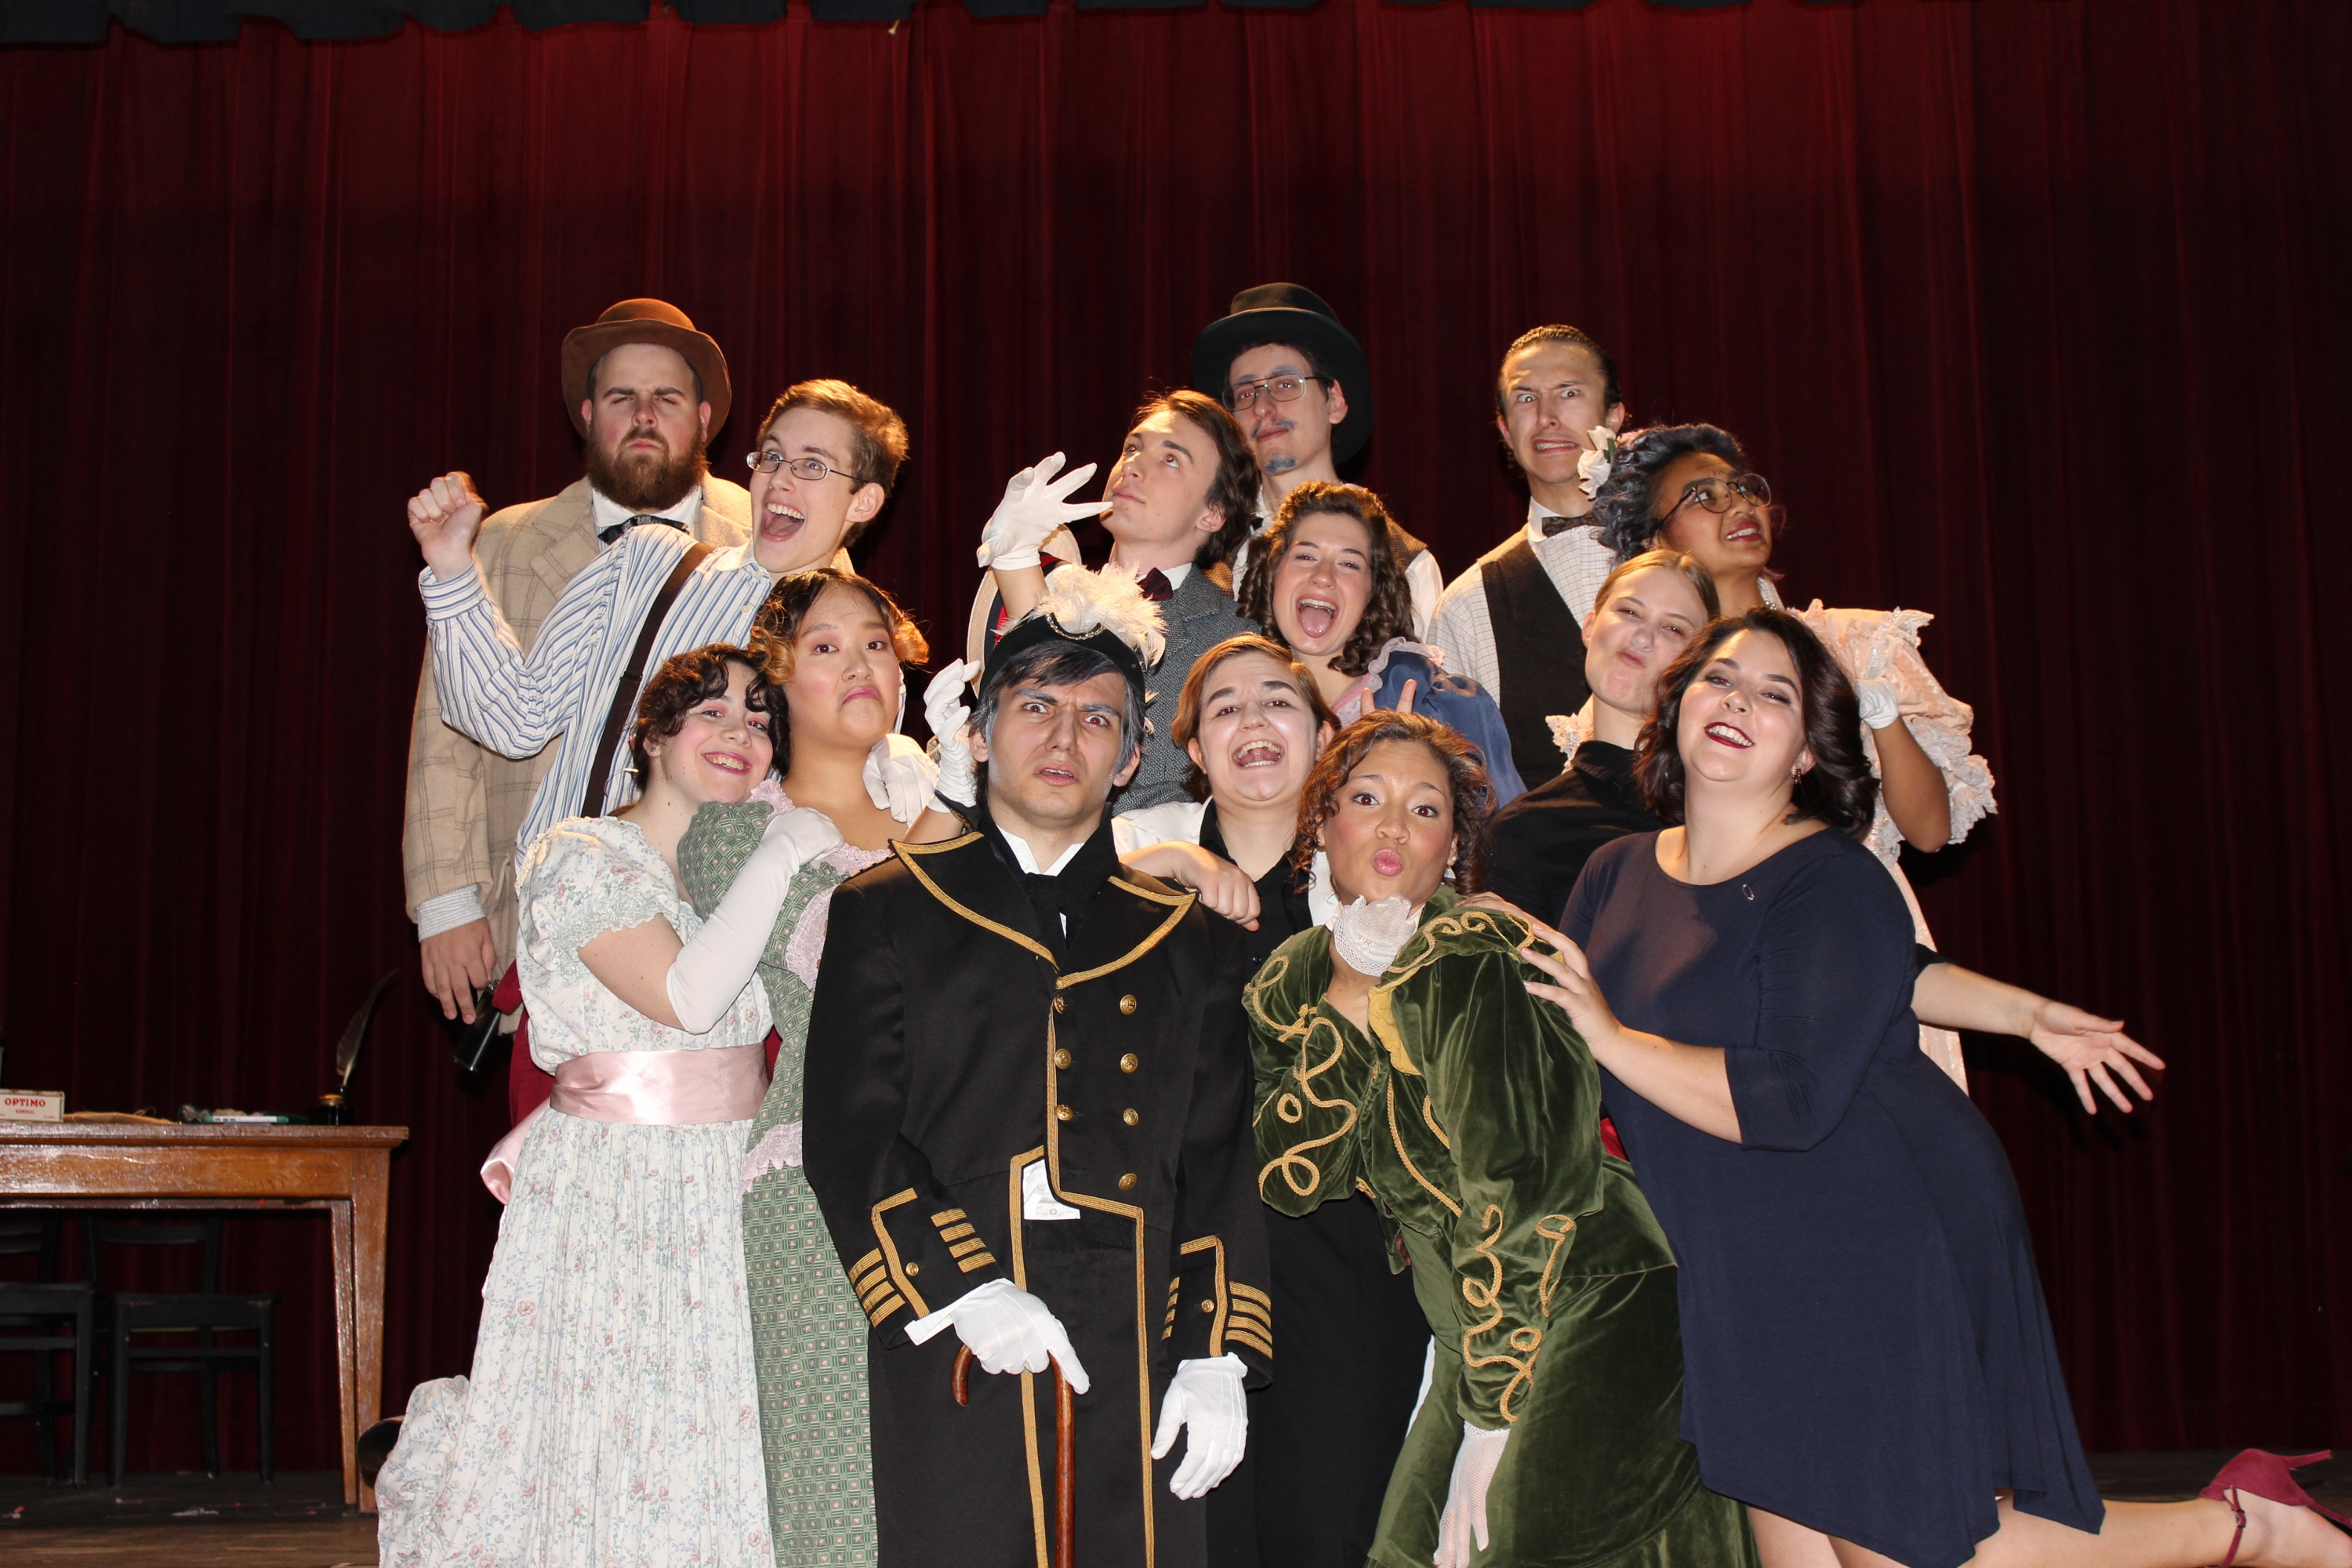 Cast members of "The Matchmaker" ham it up prior to their opening night performance.